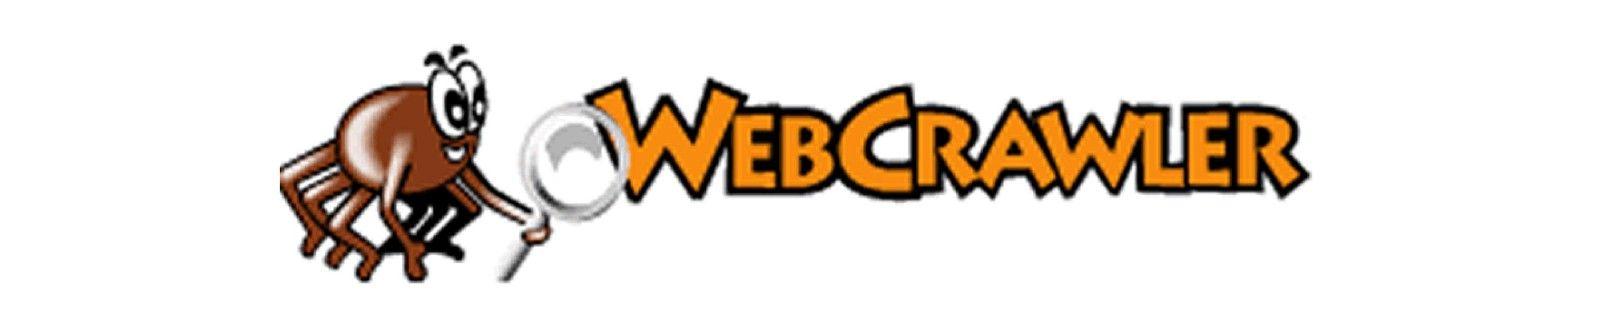 WebCrawler Logo - The Best Search Engines On The Internet – Hacker Noon